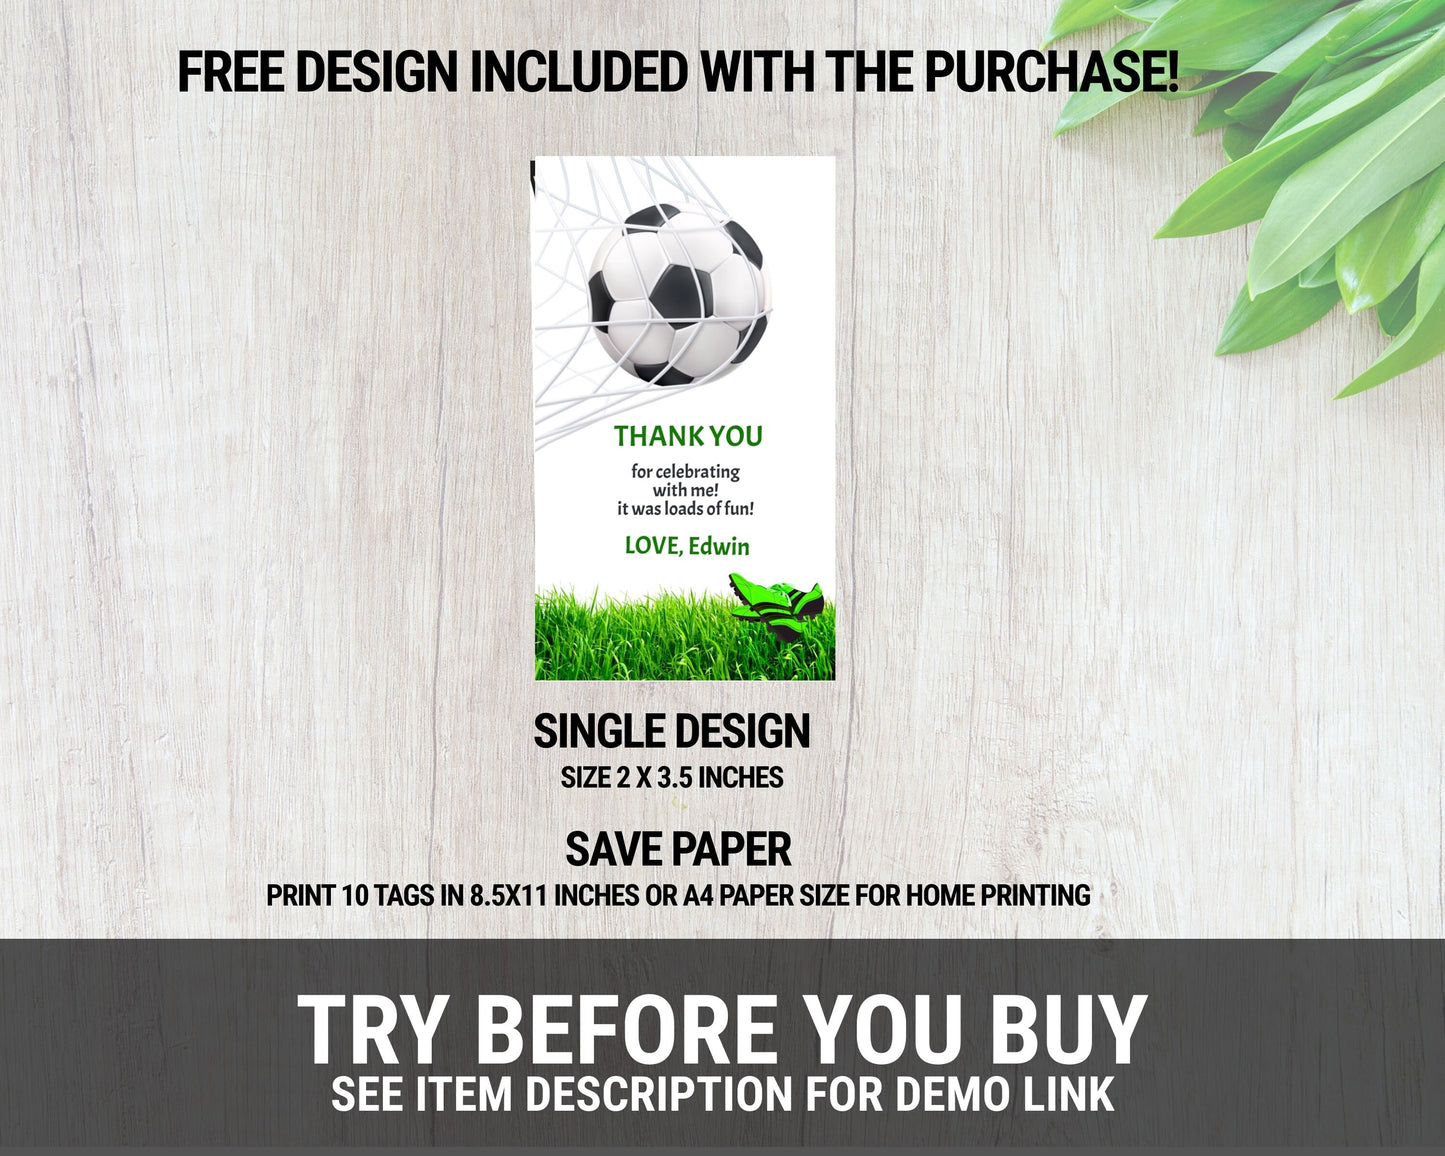 Soccer Birthday Invitation Template with photo, Soccer Birthday Invitation, Soccer thank you tag, Printable, Instant download, Soccer, SS